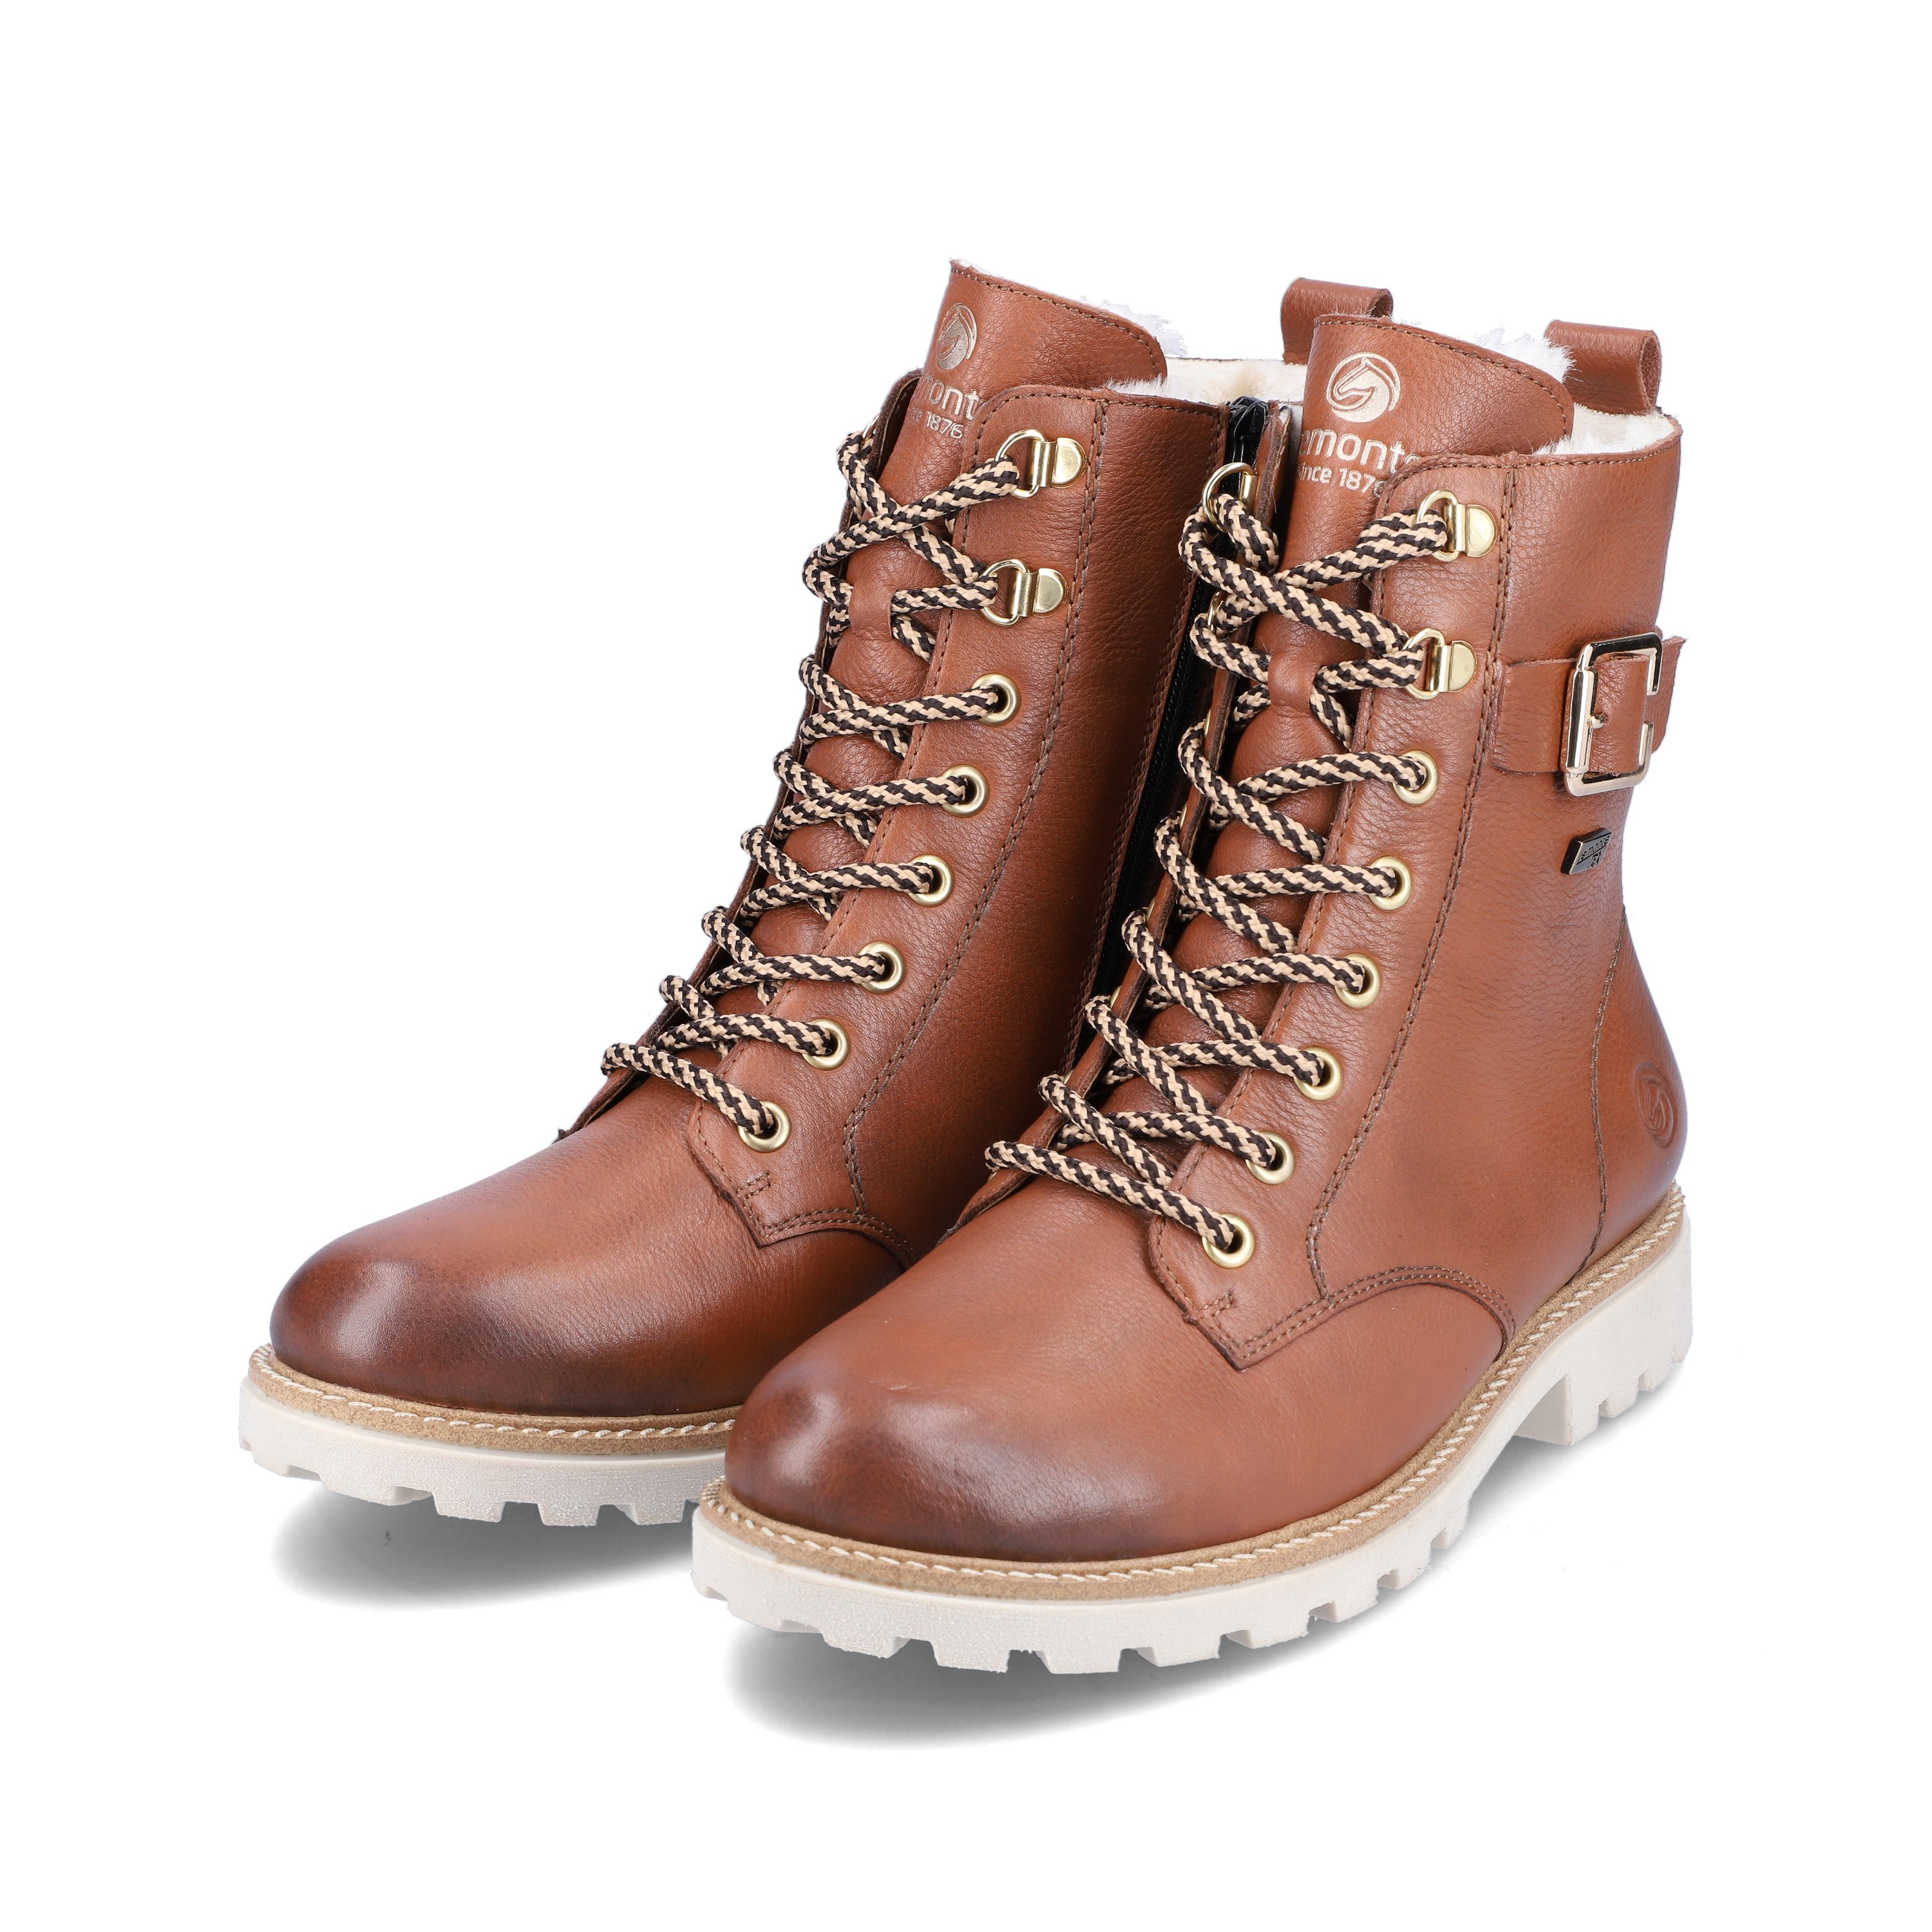 Mocha brown remonte women´s lace-up boots D8475-24 with cushioning profile sole. Shoe laterally